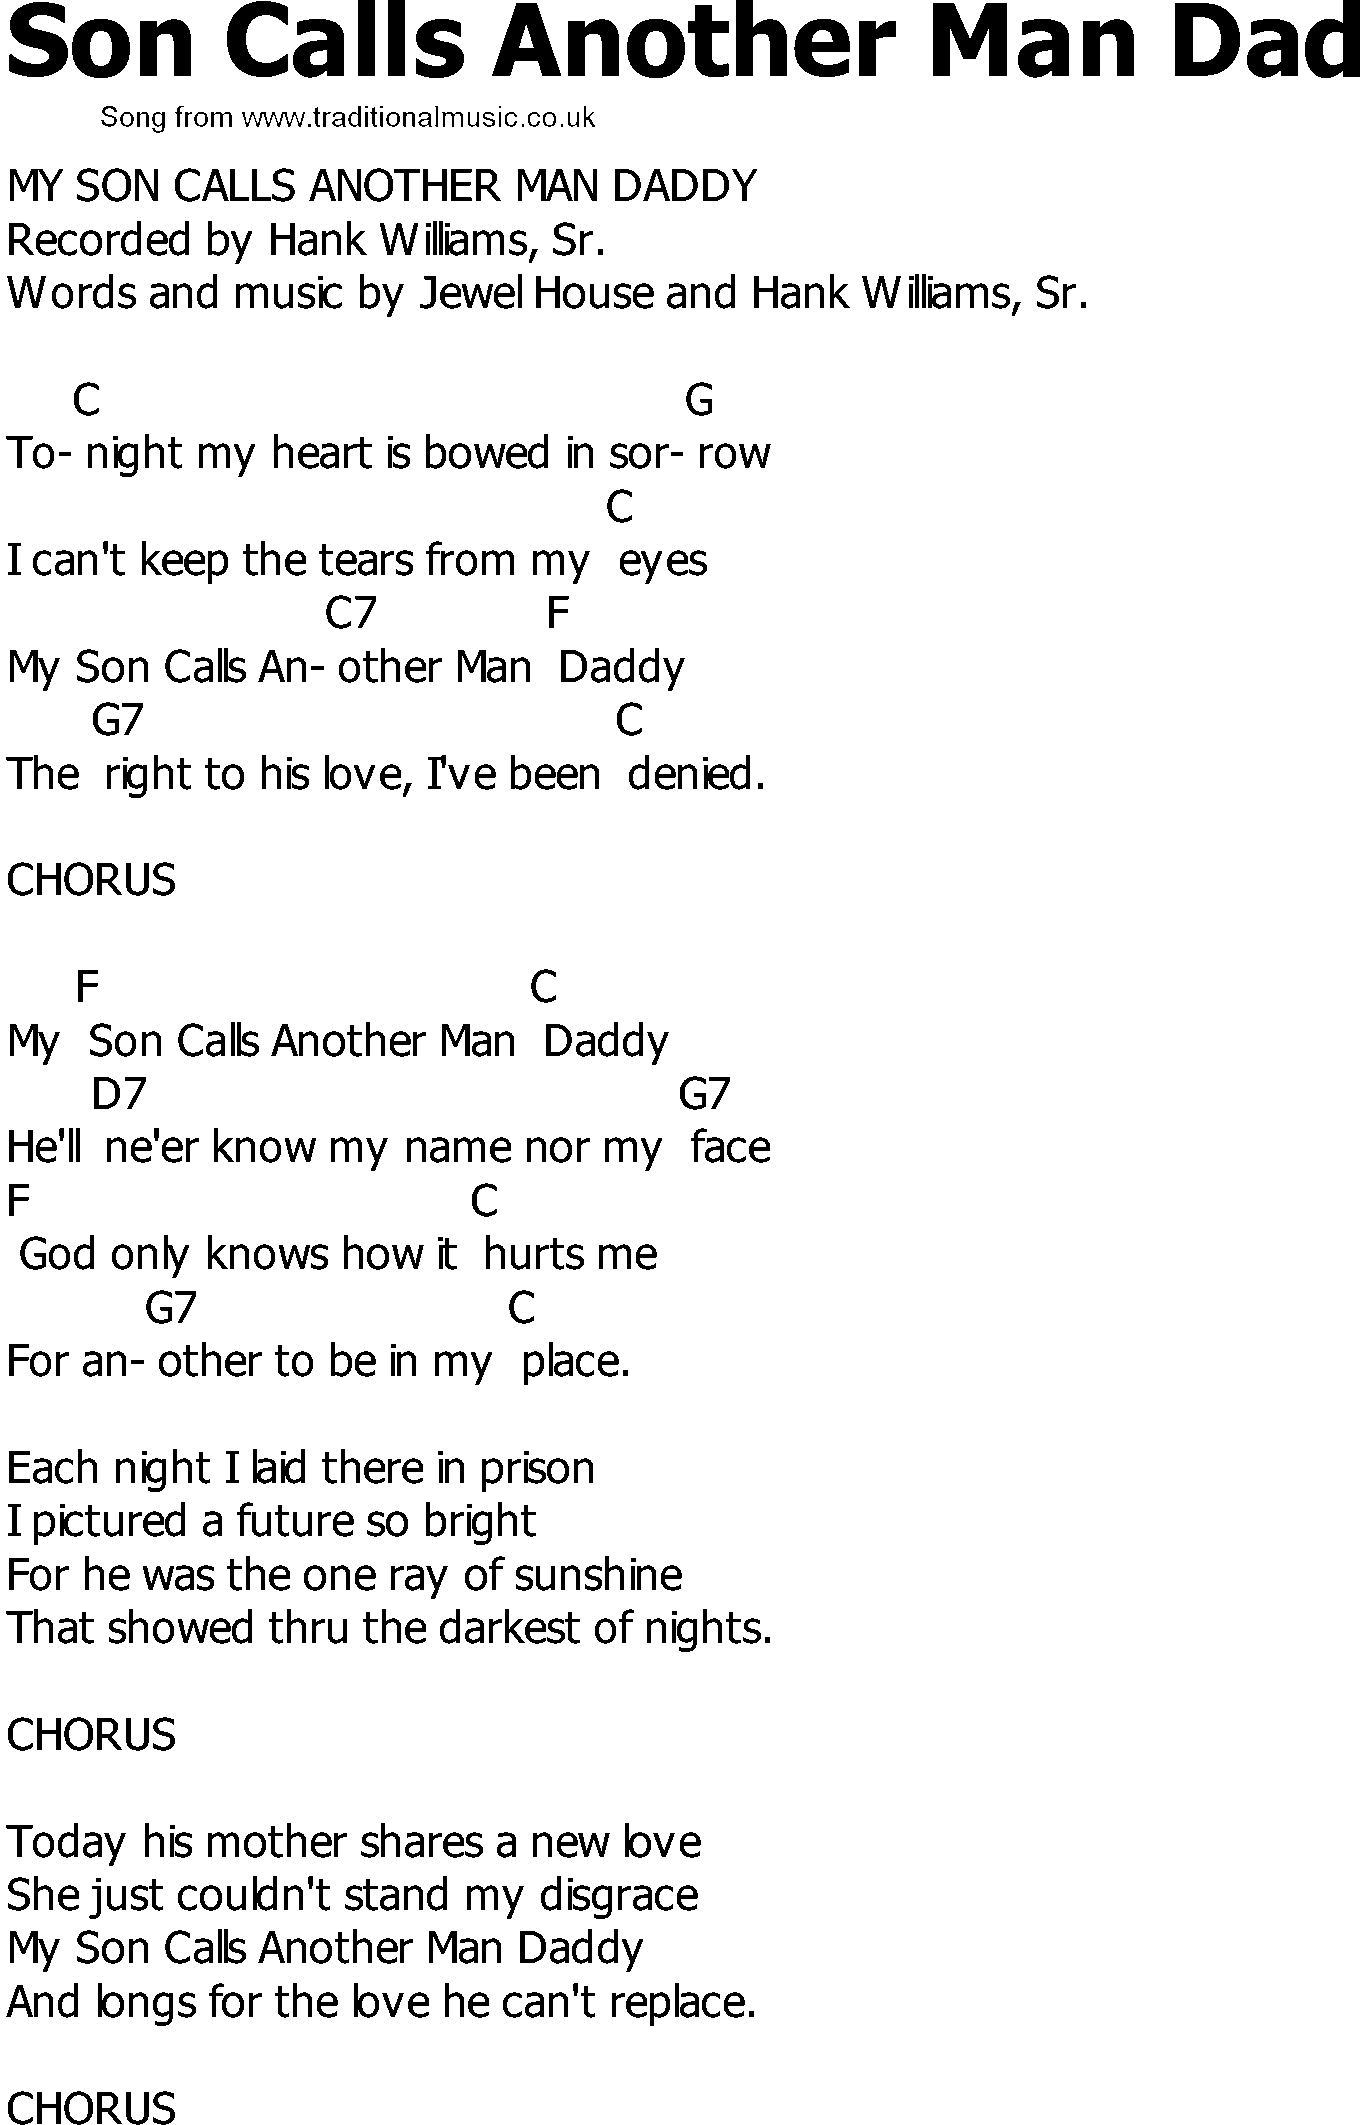 Old Country song lyrics with chords - Son Calls Another Man Dad